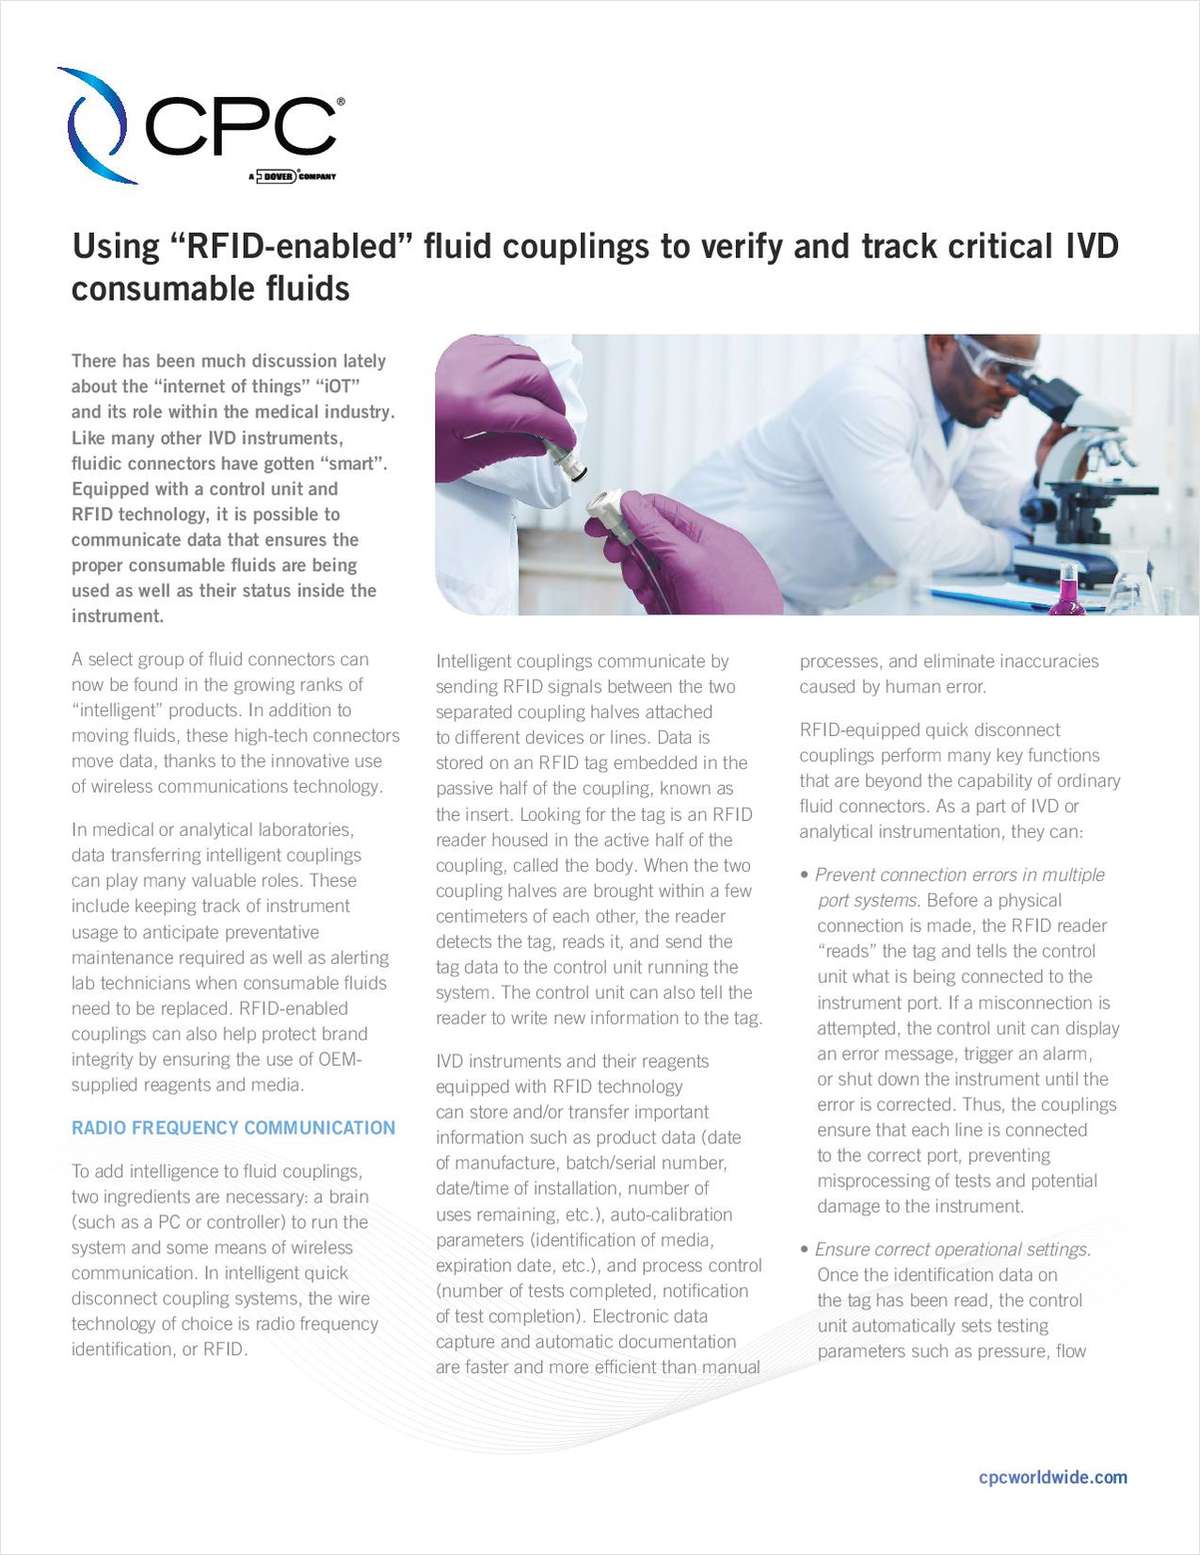 How to Verify and Track Critical IVD Consumable Fluids